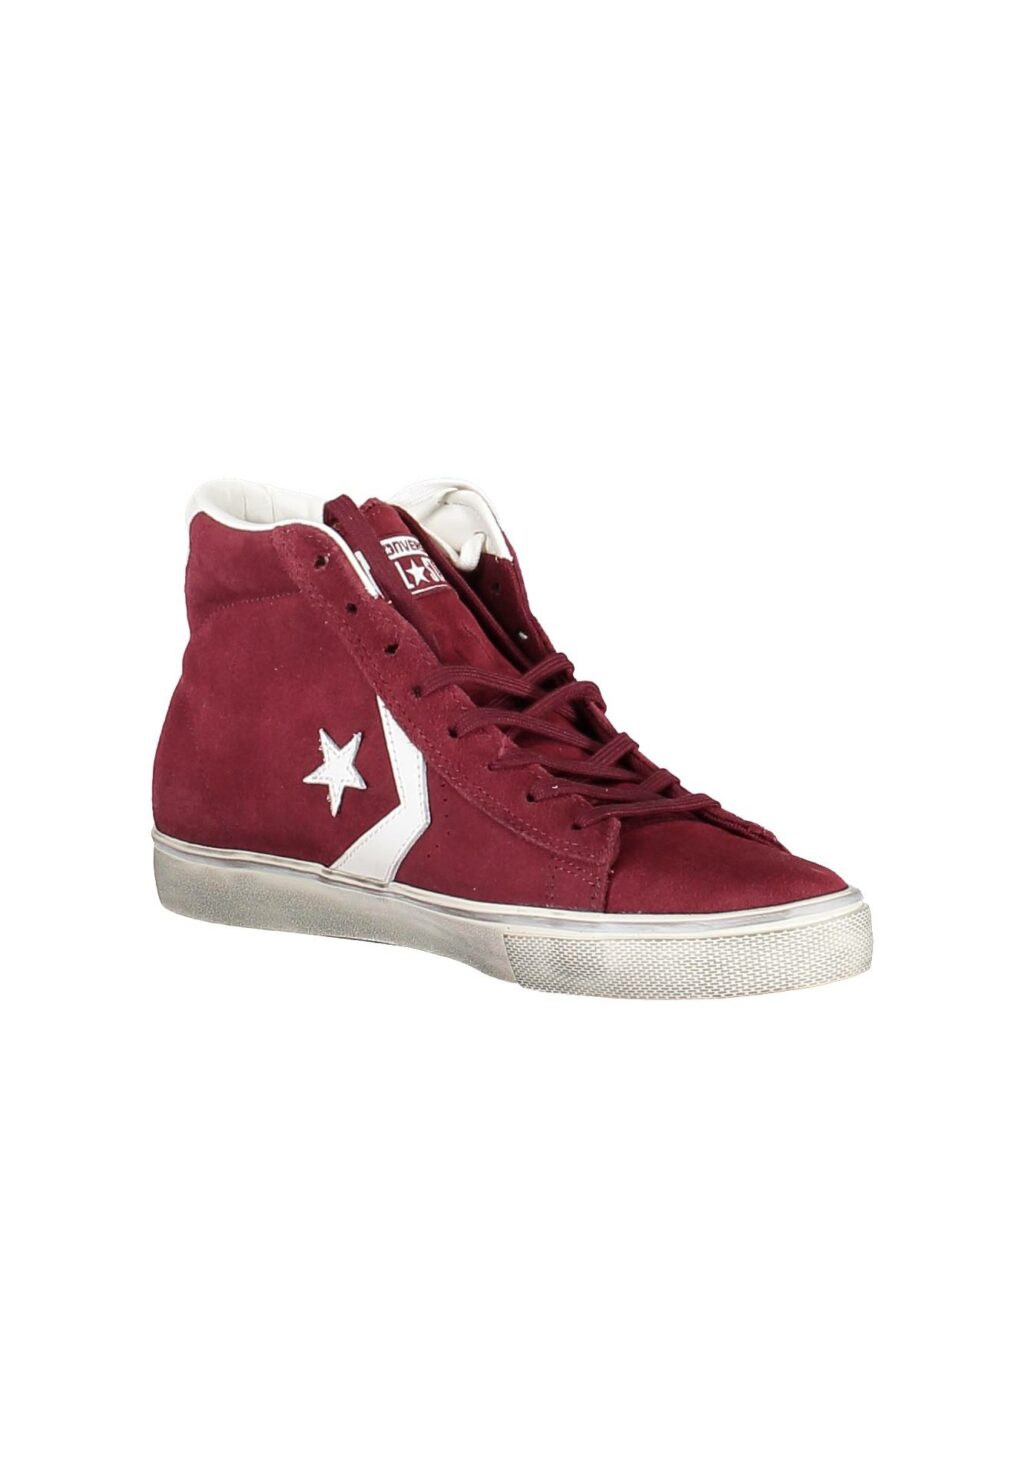 CONVERSE RED MEN'S SPORTS SHOES 158932C_ROSSO_CHOCOLATE-TRUFFLESTAR-WHITE